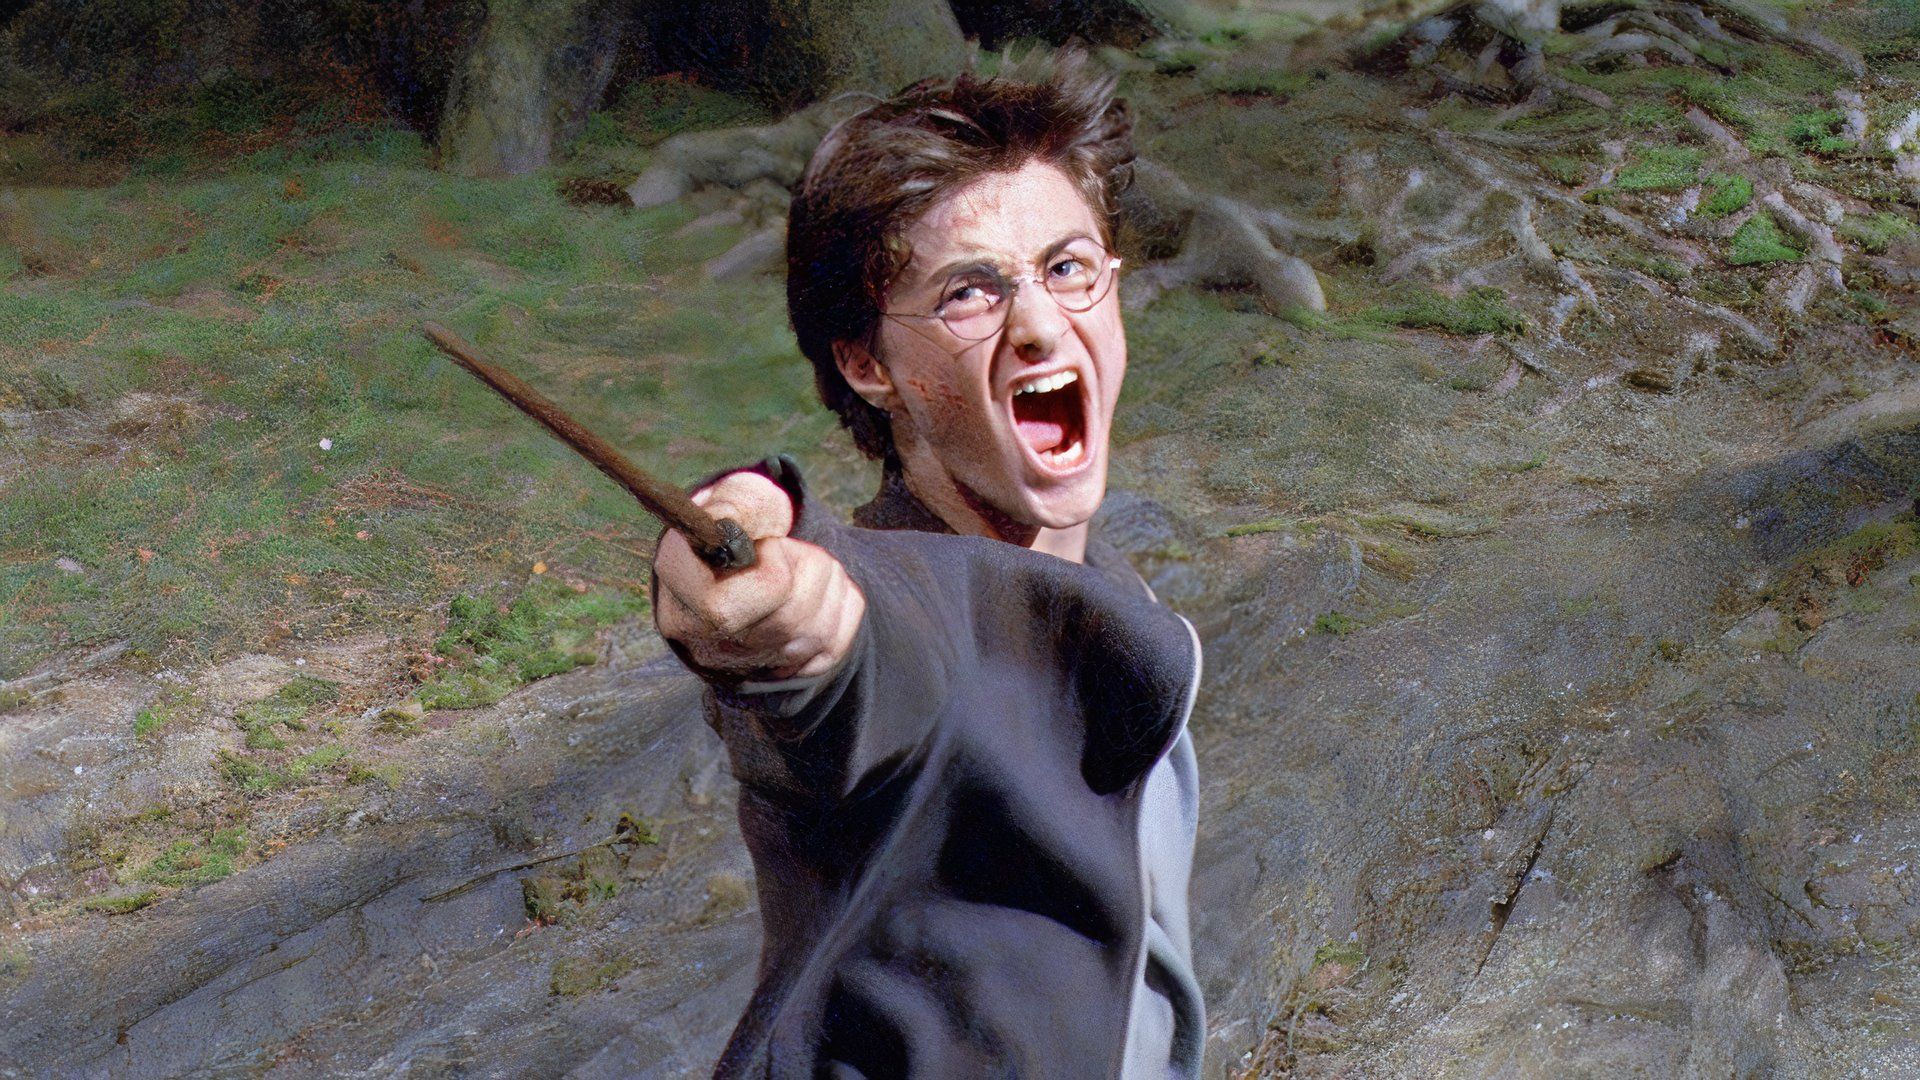 Harry Potter casts a Patronus in Harry Potter and the Prisoner of Azkaban.